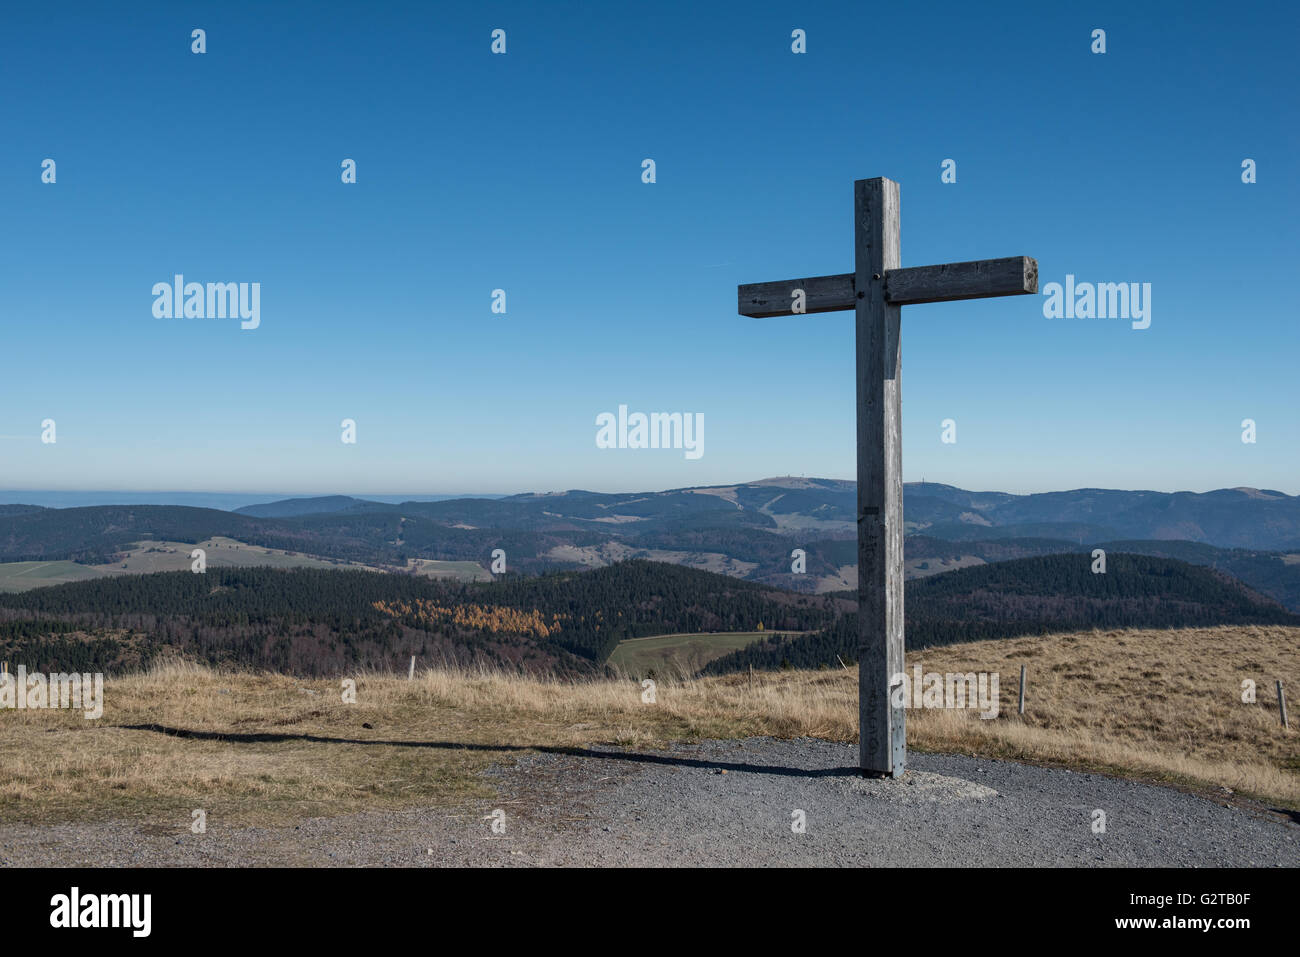 27.10.2015, Schoenau im Schwarzwald, Baden-Wuerttemberg, Germany - Summit cross on the Belchen. 00K151029D477CAROEX.JPG - NOT for SALE in G E R M A N Y, A U S T R I A, S W I T Z E R L A N D [MODEL RELEASE: NOT APPLICABLE, PROPERTY RELEASE: NO, (c) caro photo agency / Kaiser, http://www.caro-images.com, info@carofoto.pl - Any use of this picture is subject to royalty!] Stock Photo